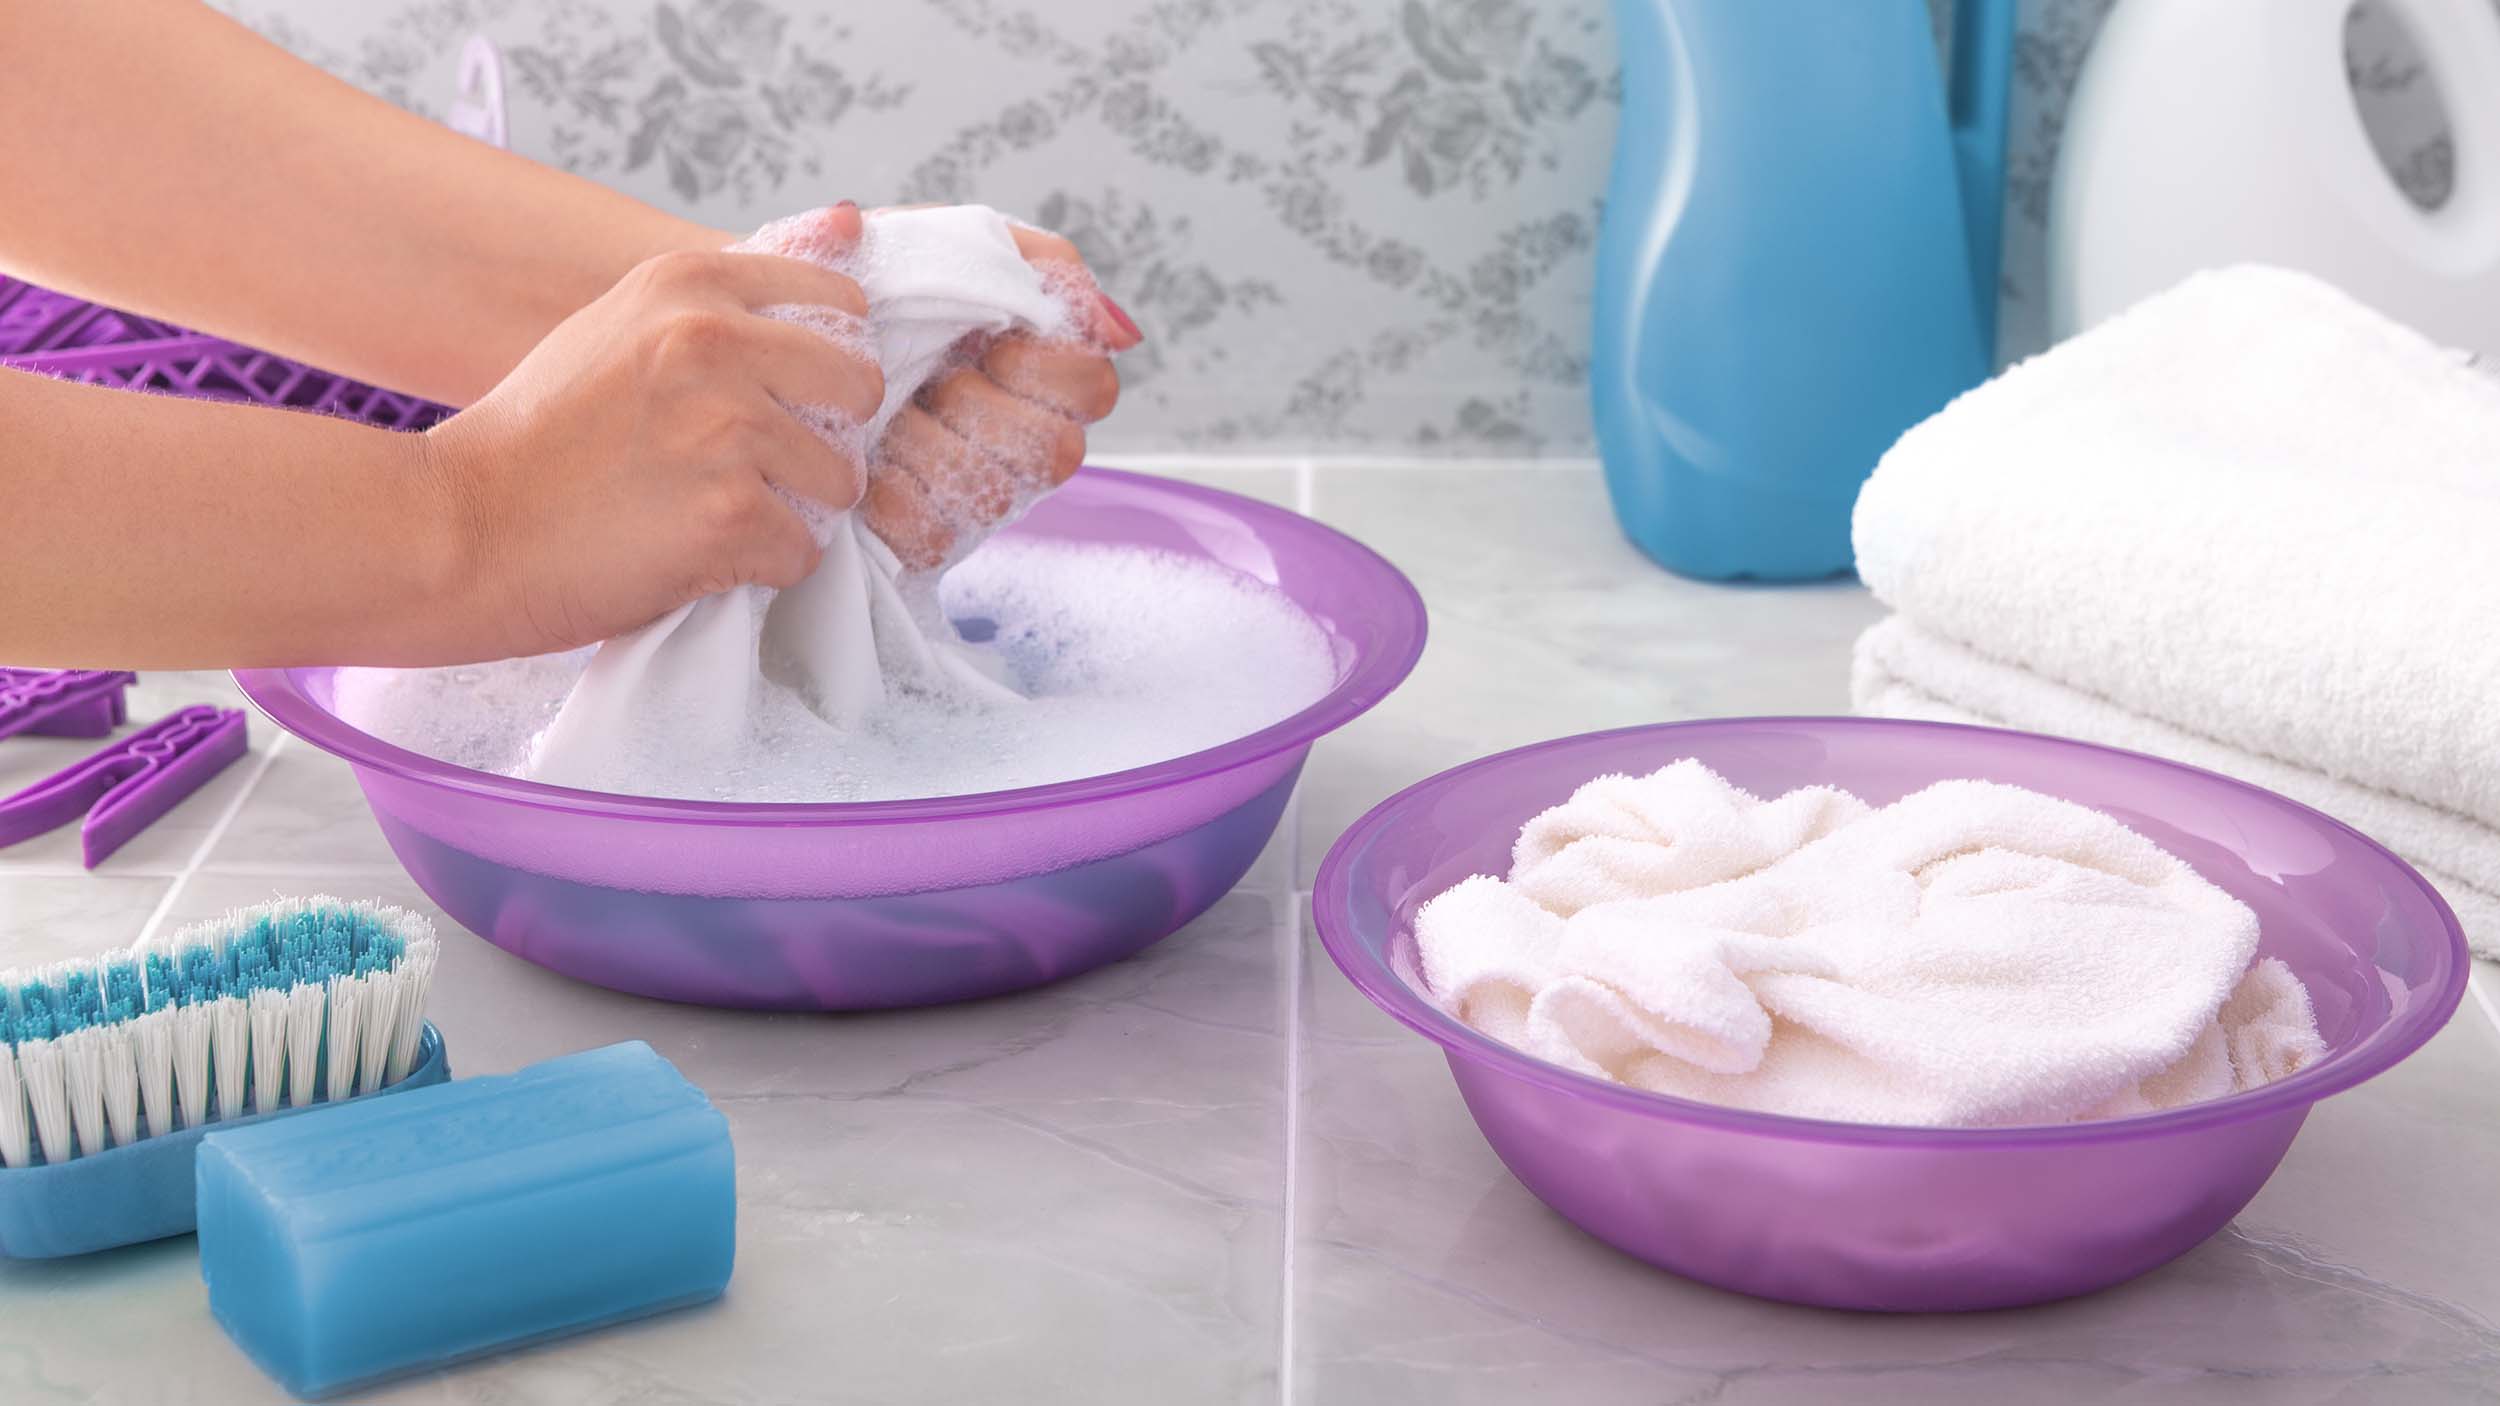 How to Hand-Wash and Sanitize Clothes at Home